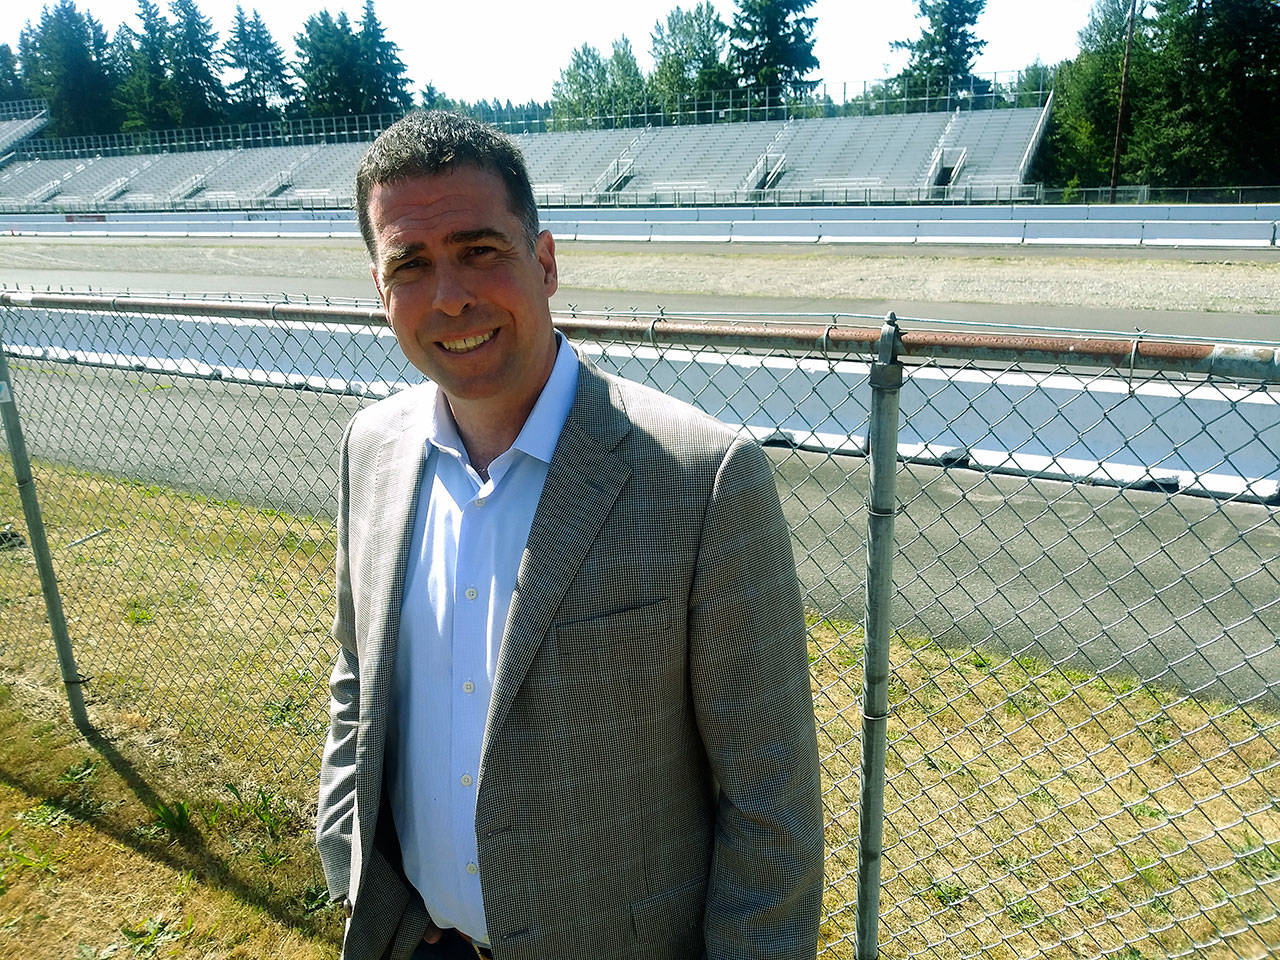 At long last, Pacific Raceways is undergoing improvements, which track president Jason Fiorito says will make the Kent complex a hub of many great opportunities in the automotive industry. ROBERT WHALE, Auburn Reporter